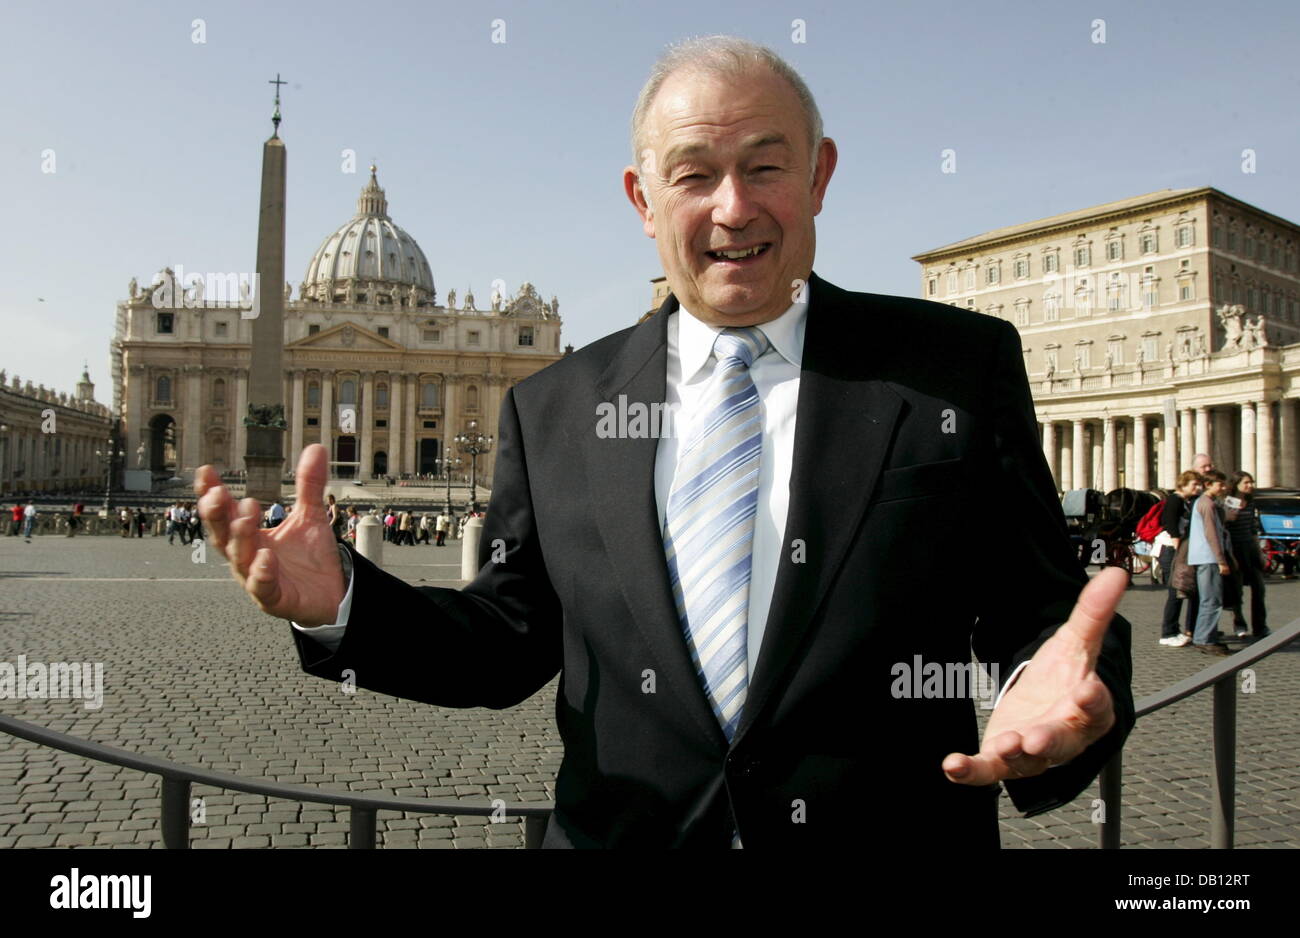 Bavarian Prime Minsiter Guenther Beckstein poses on Saint Peter?s Square of Vatican City, Vatican City State, 27 October 2007. Beckstein was granted by private audience by Pope Benedict XVI and will visit a concert of the Symphonic Orchestra of the Bavarian Broadcast, which is attended also by the pontiff. The concert with Beethoven?s 9th Symphony and - on the Pope?s request - the  Stock Photo